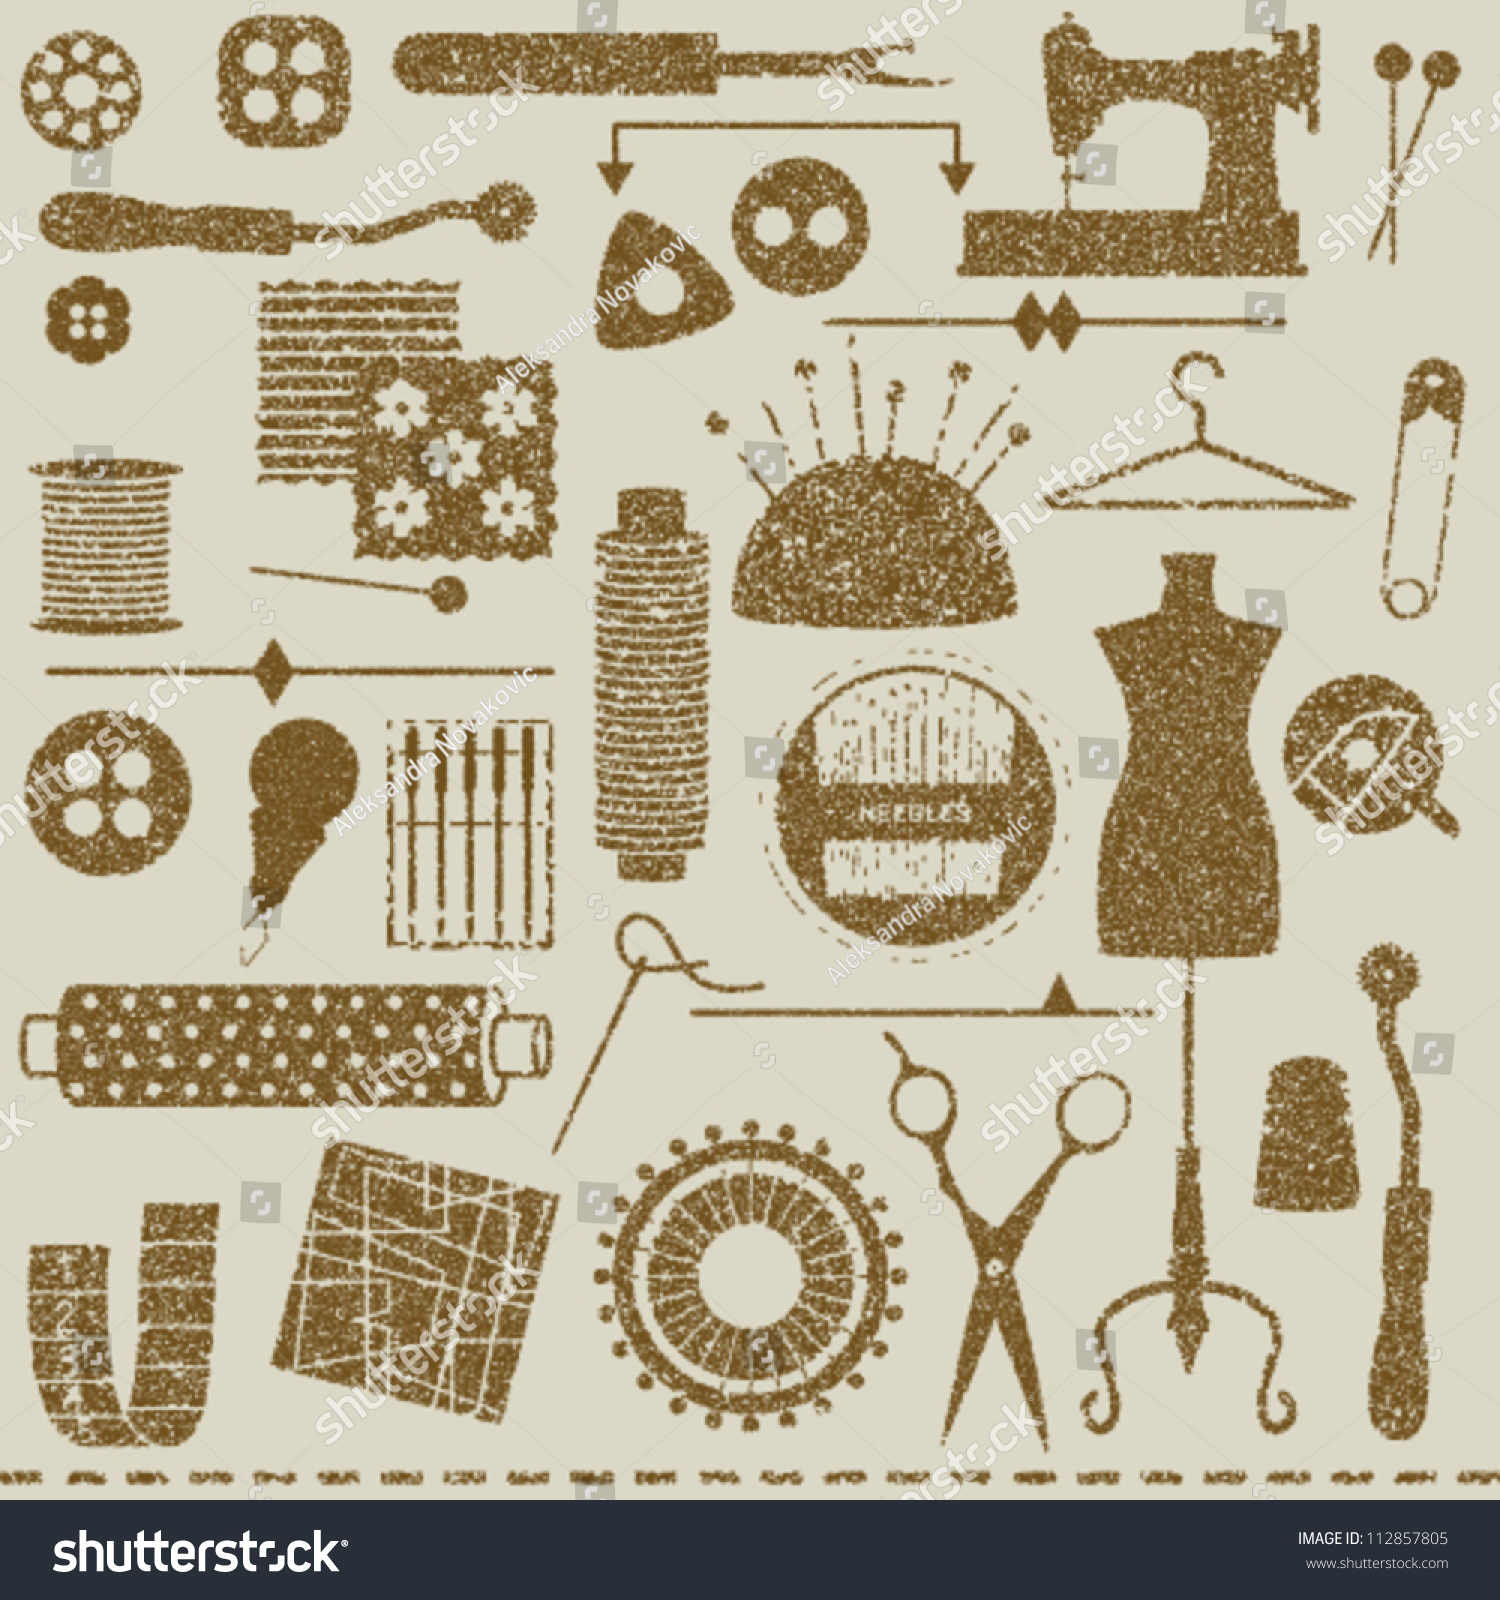 Vintage Textured Sewing And Tailoring Symbols Stock Vector Illustration ...